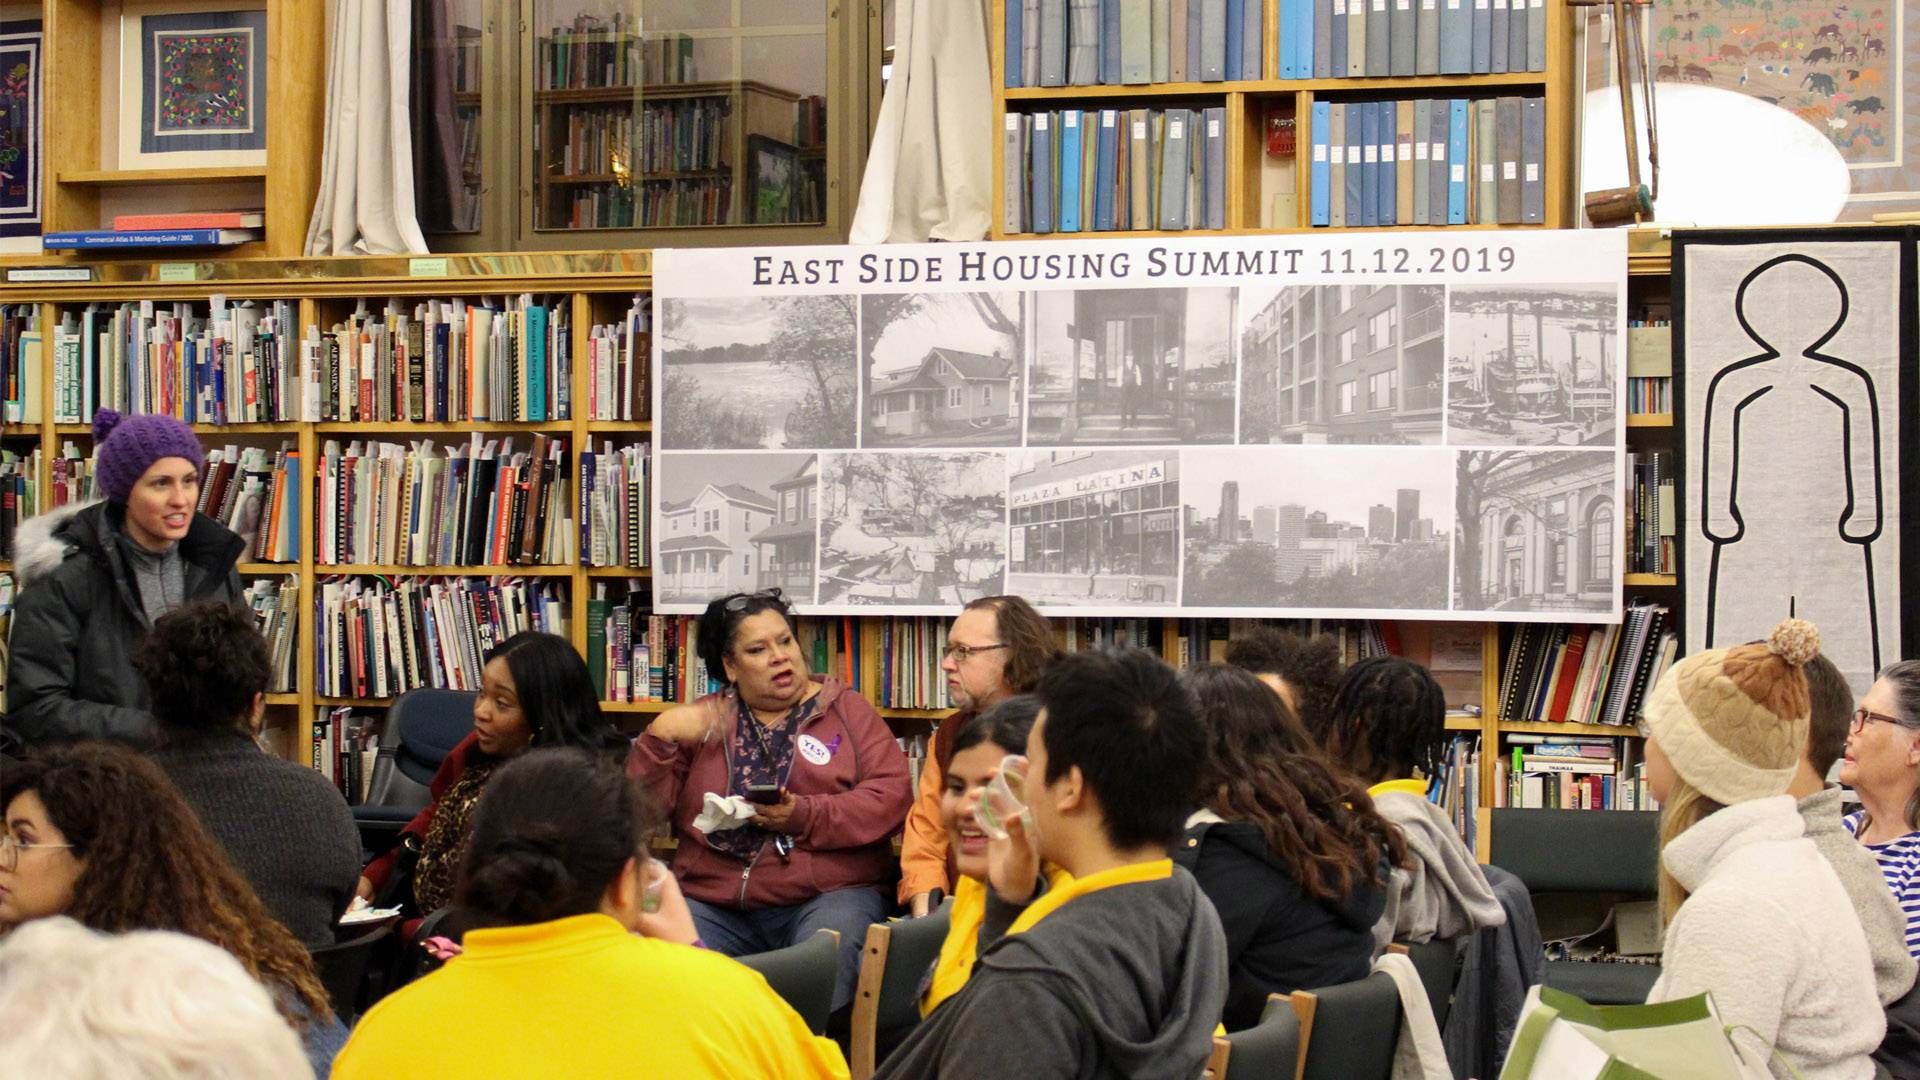 People gather at a library for an event